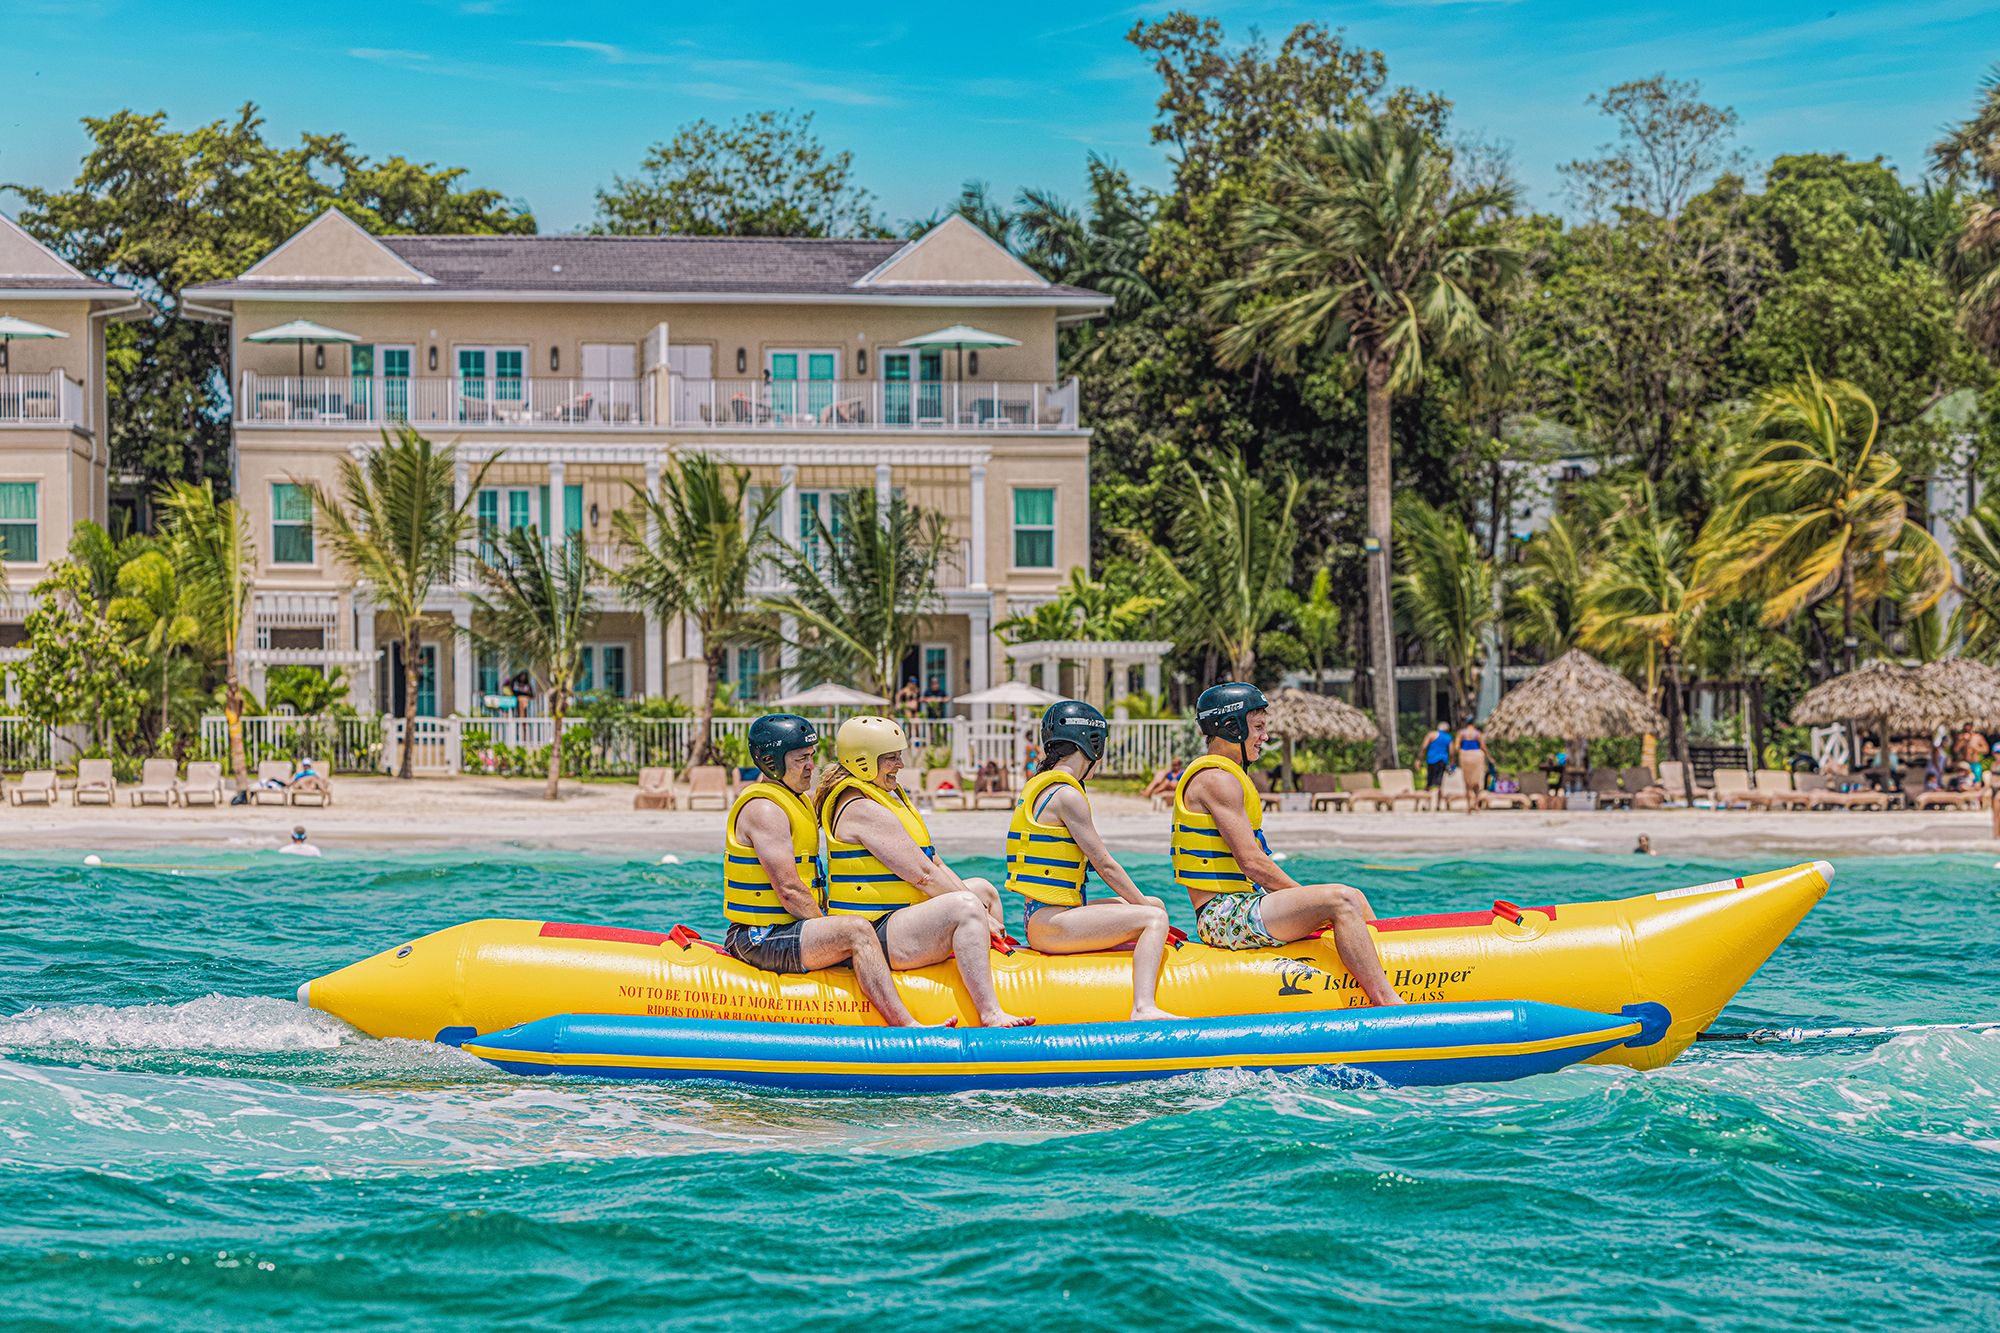 Beaches Negril vs. Beaches Ocho Rios: Which Is Best For Your Family Getaway?